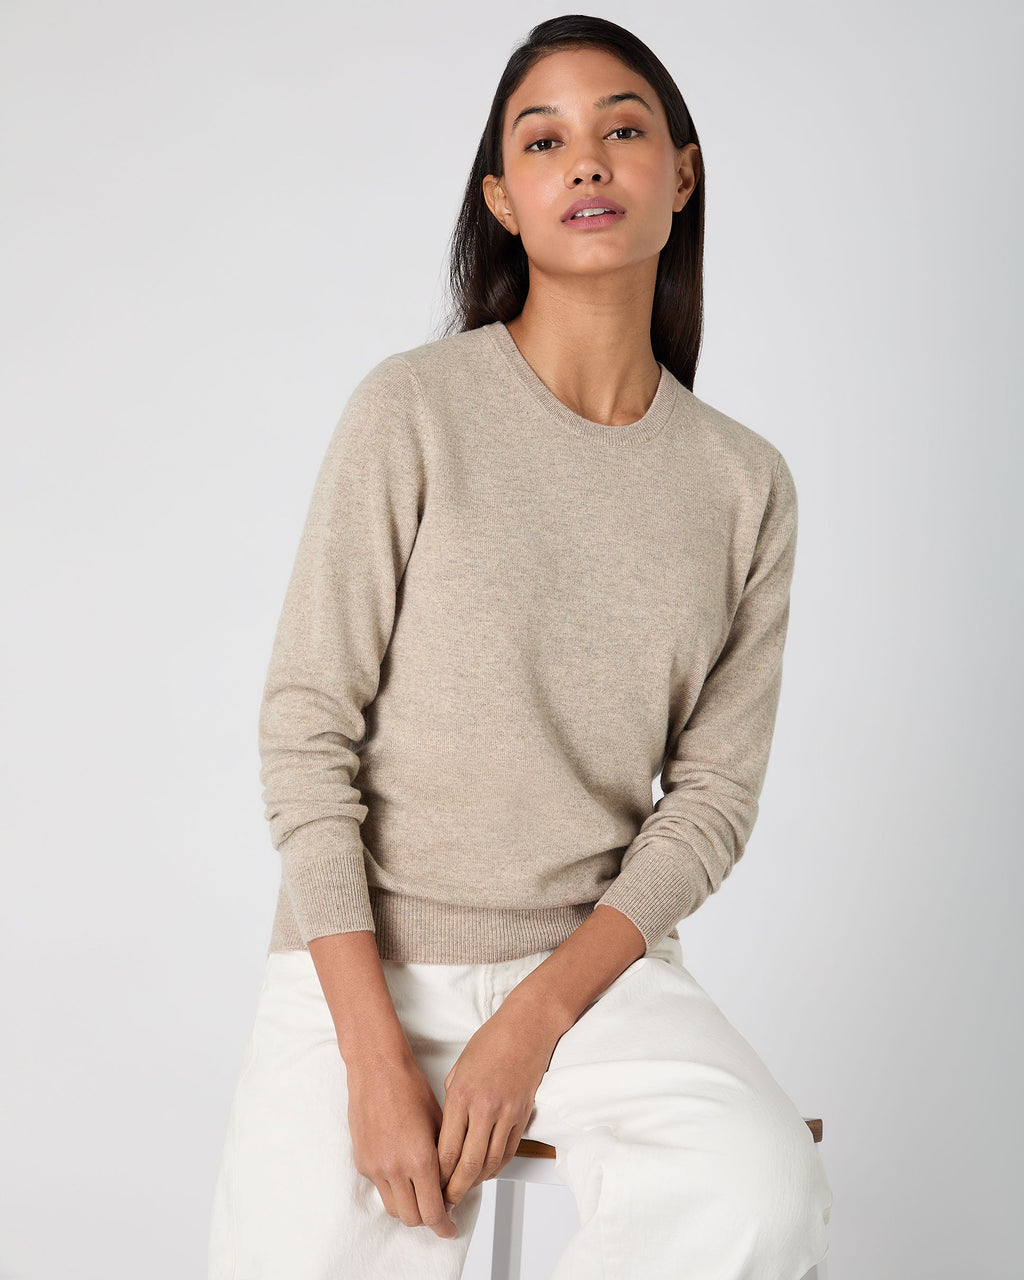 Womens Crew Neck Sweaters, Womens Cashmere